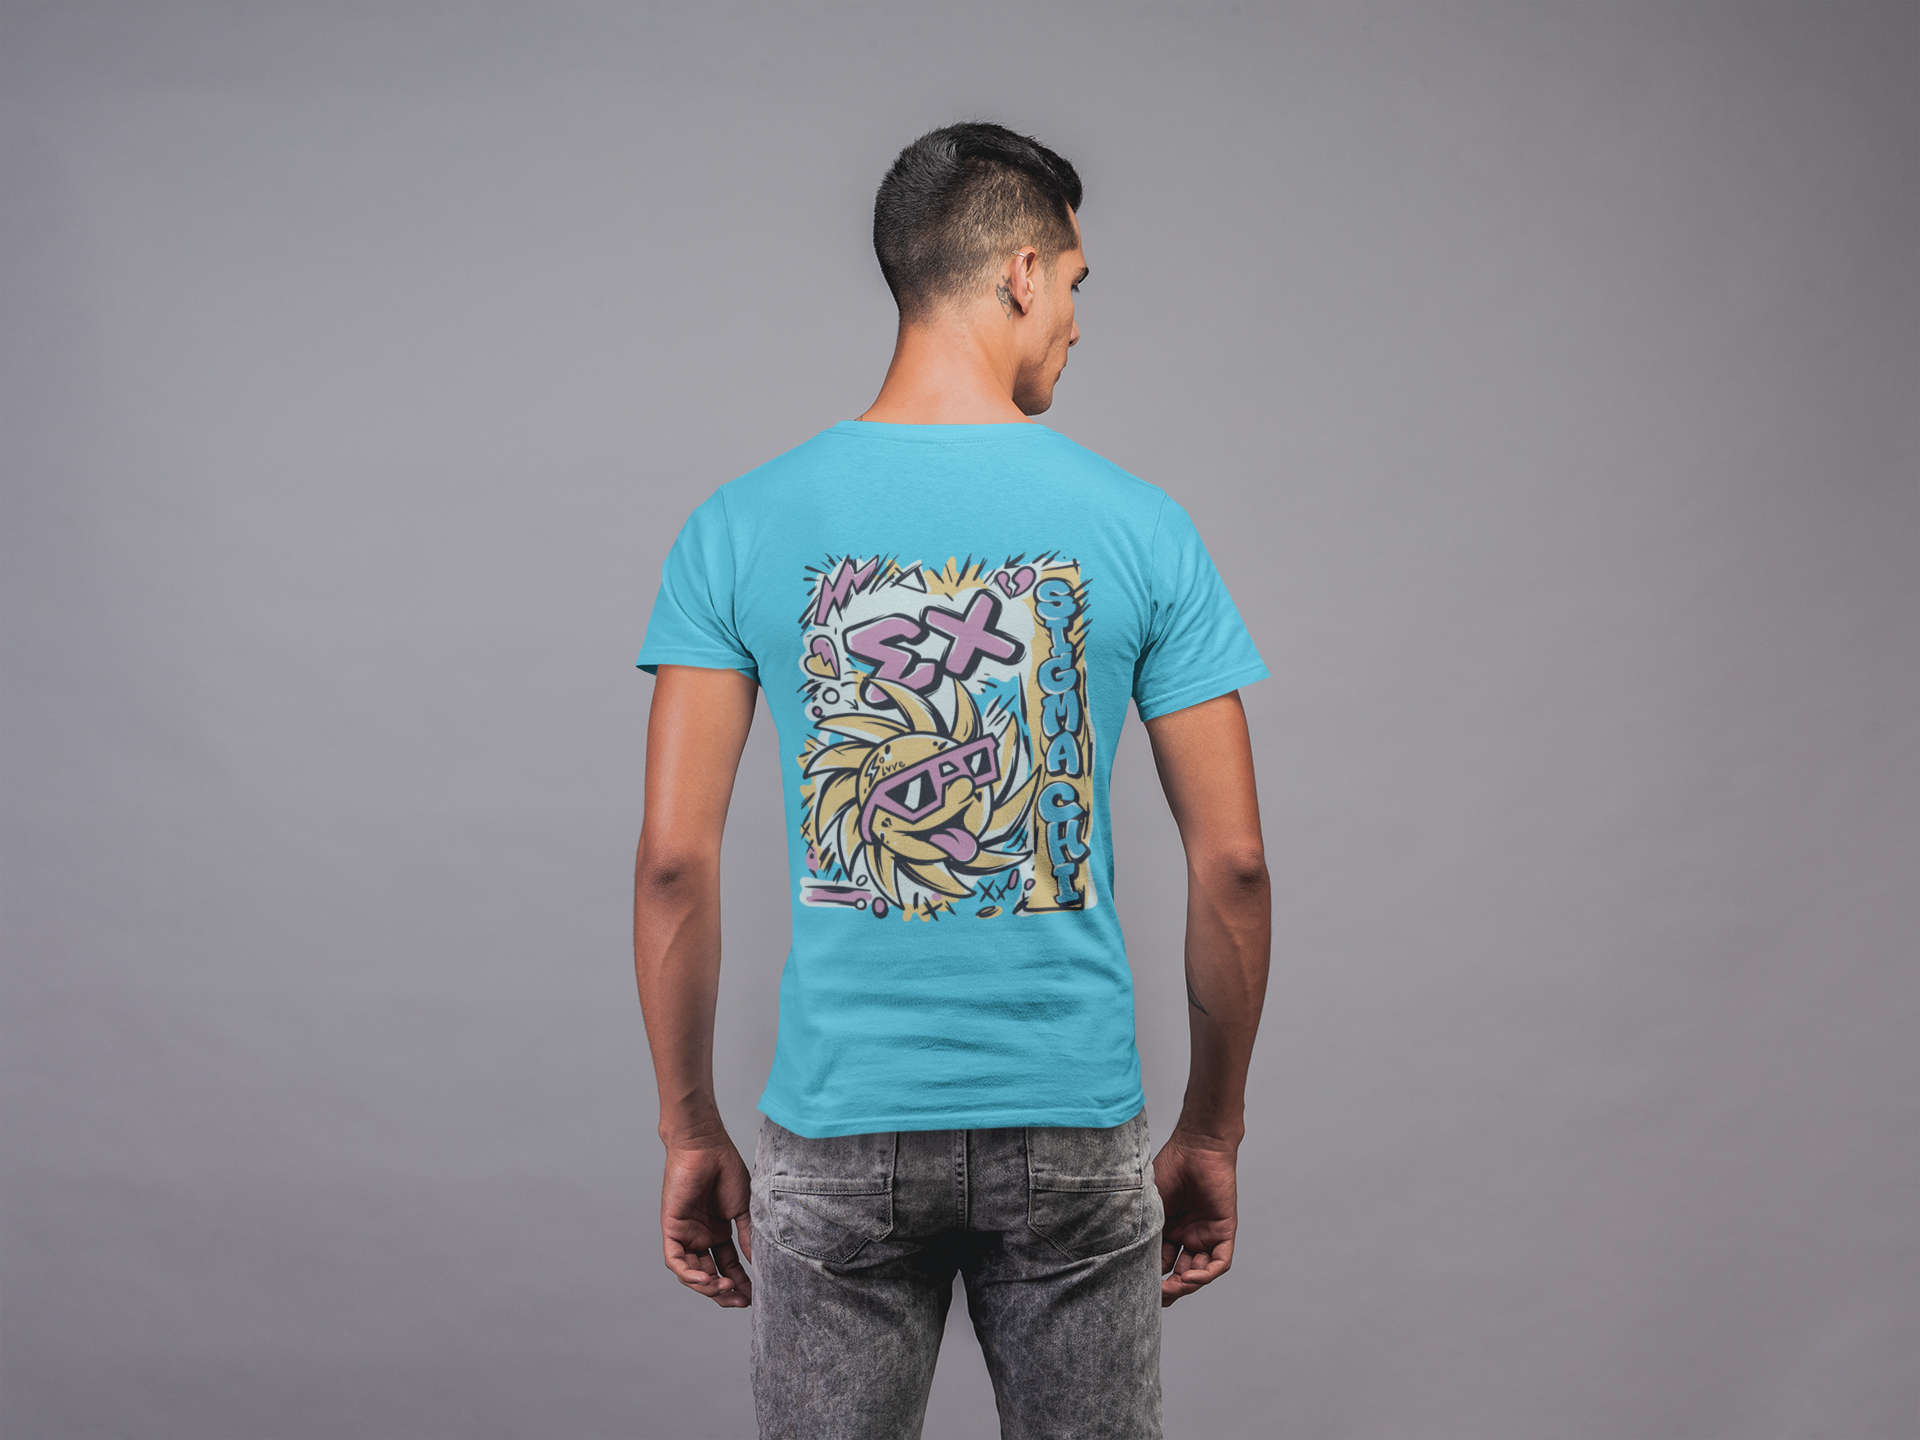 Turquoise Sigma Chi Graphic T-Shirt | Fun in the Sun | Sigma Chi Fraternity Apparel model 